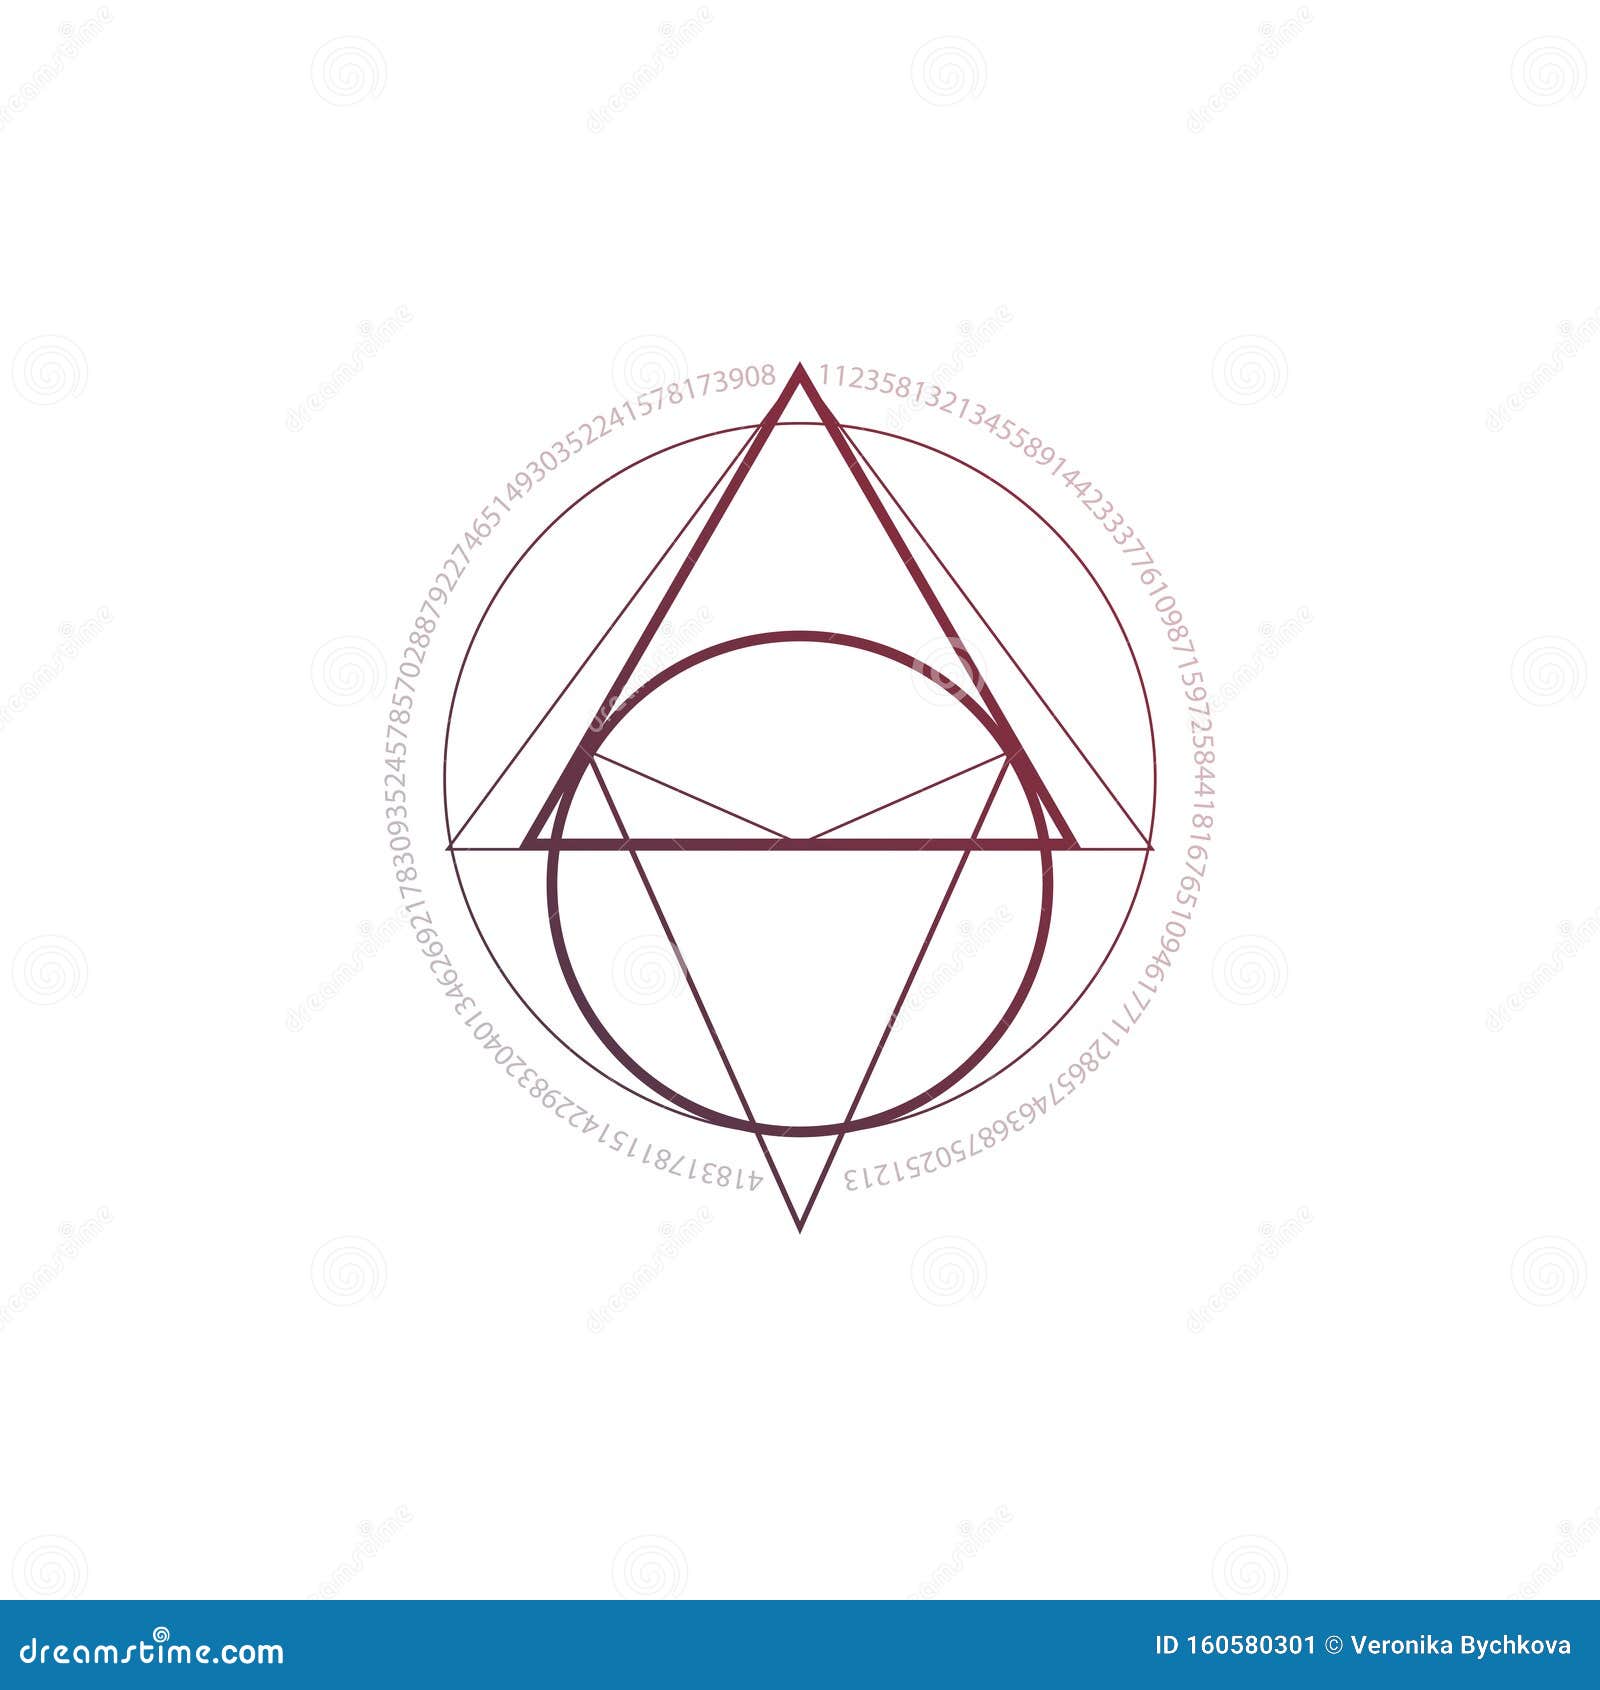 Sacred Geometry Minimal Tattoo Sketch with Interlocking Circles and  Triangles. Stock Vector - Illustration of circle, geometry: 160580301